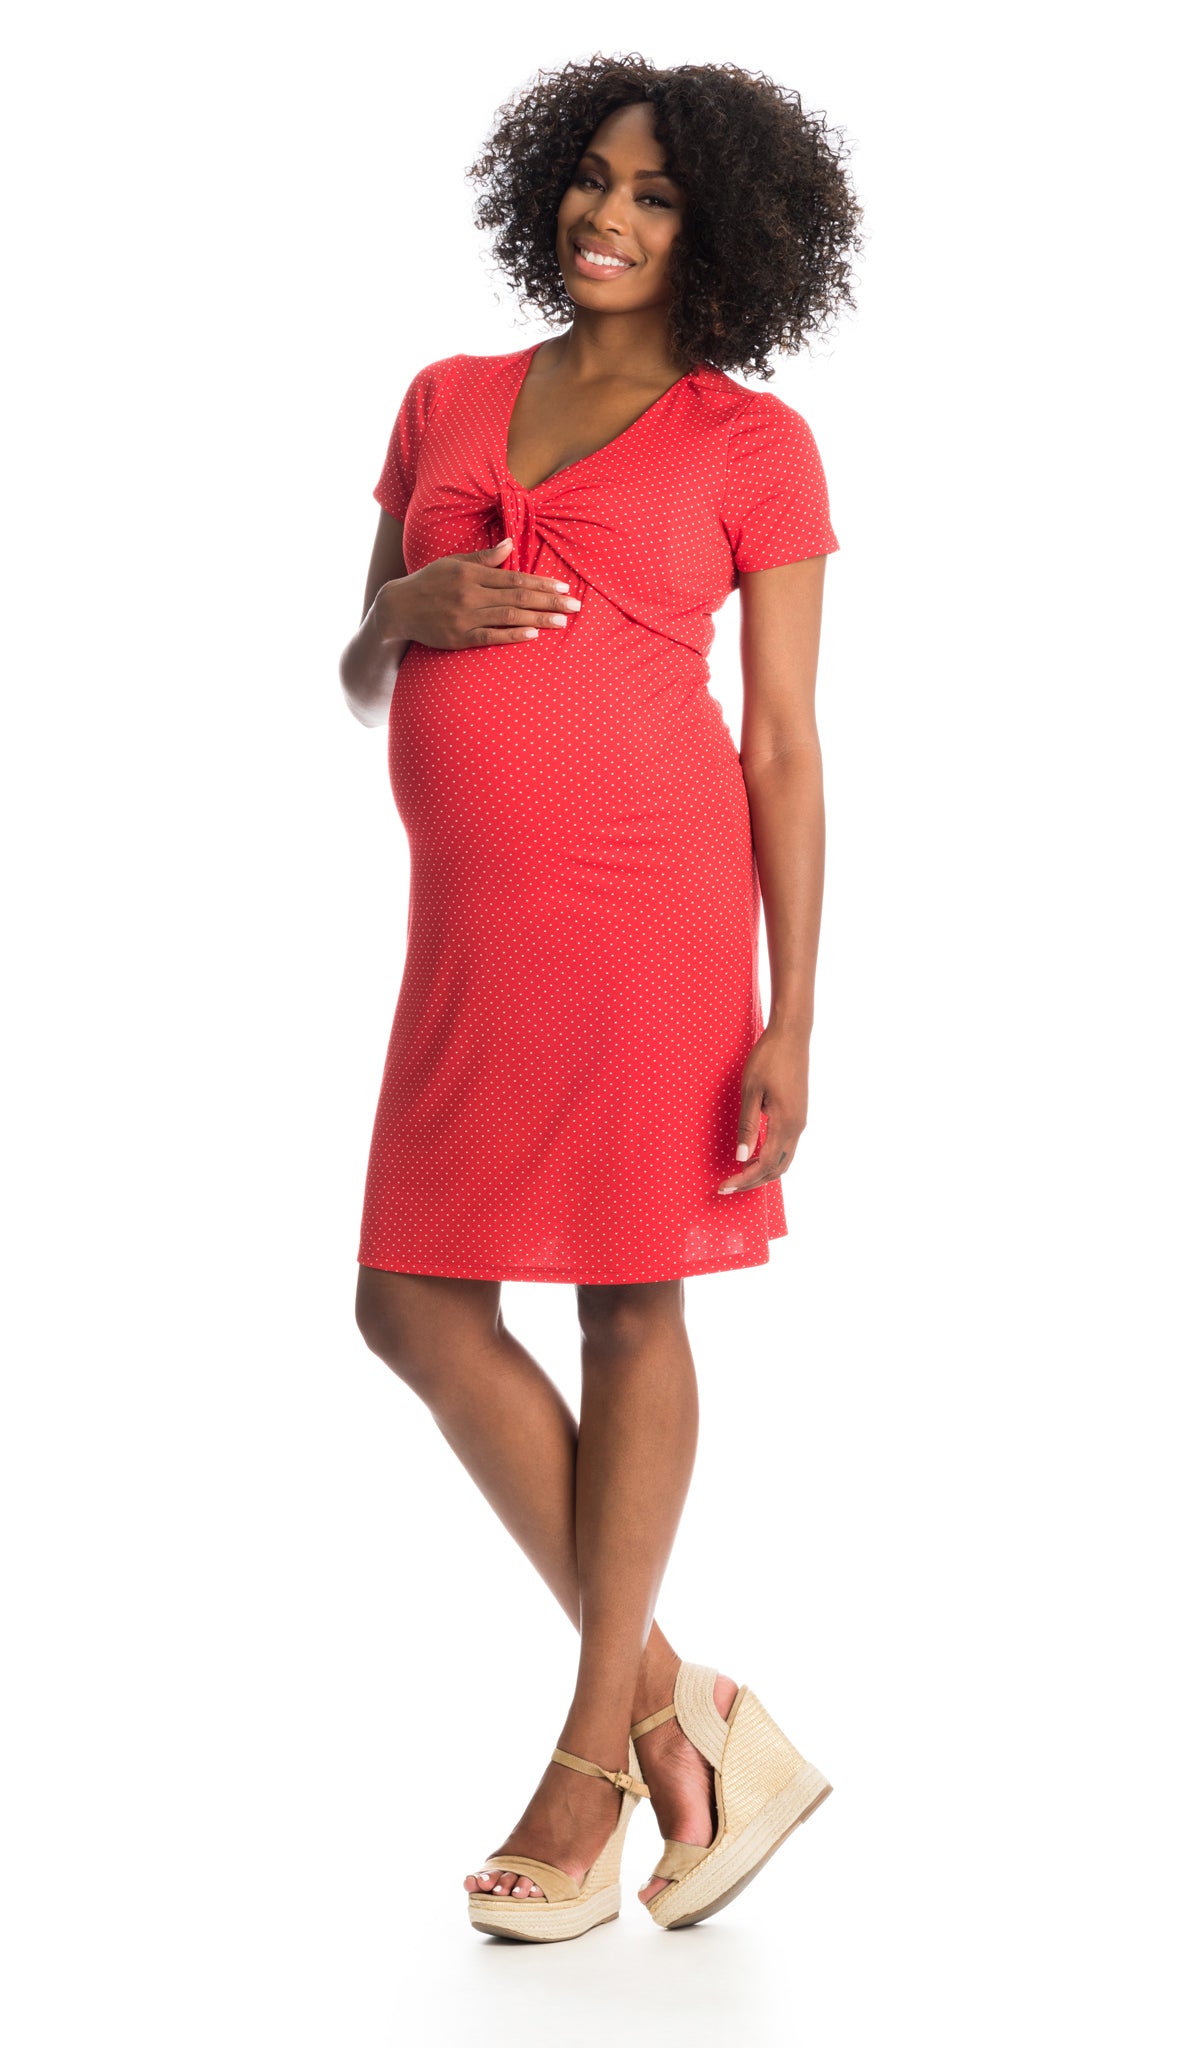 Red Dot Jada dress worn by pregnant woman with one hand on her belly.